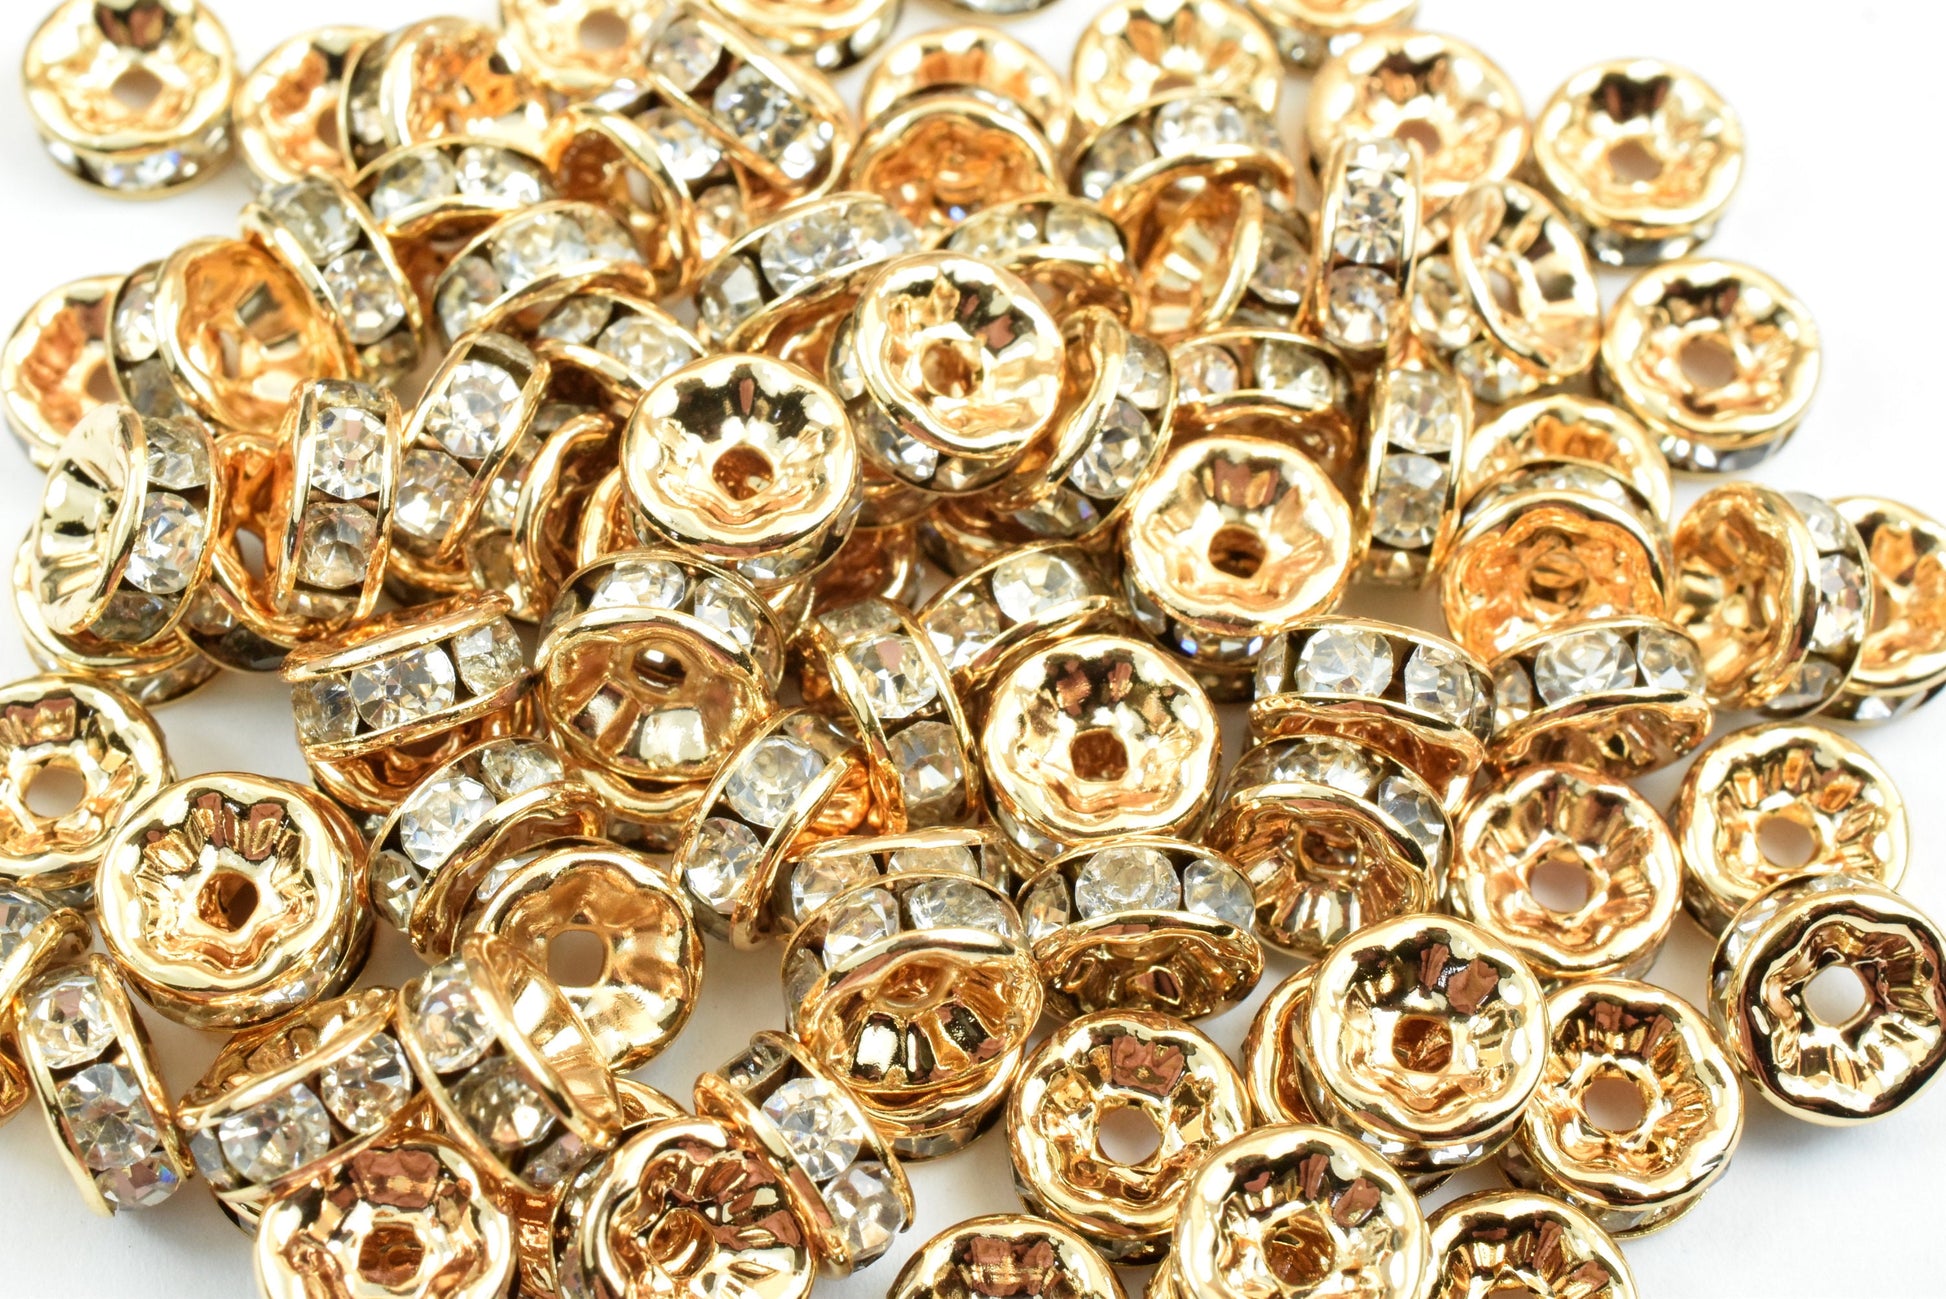 Gold Filled EP Rhinestone Spacer Roundel wheel round sizes 4mm/5mm/6mm/7mm/8mm/10mm/12mm Findings for jewelry supplier and wholesale BeadsFindingDepot